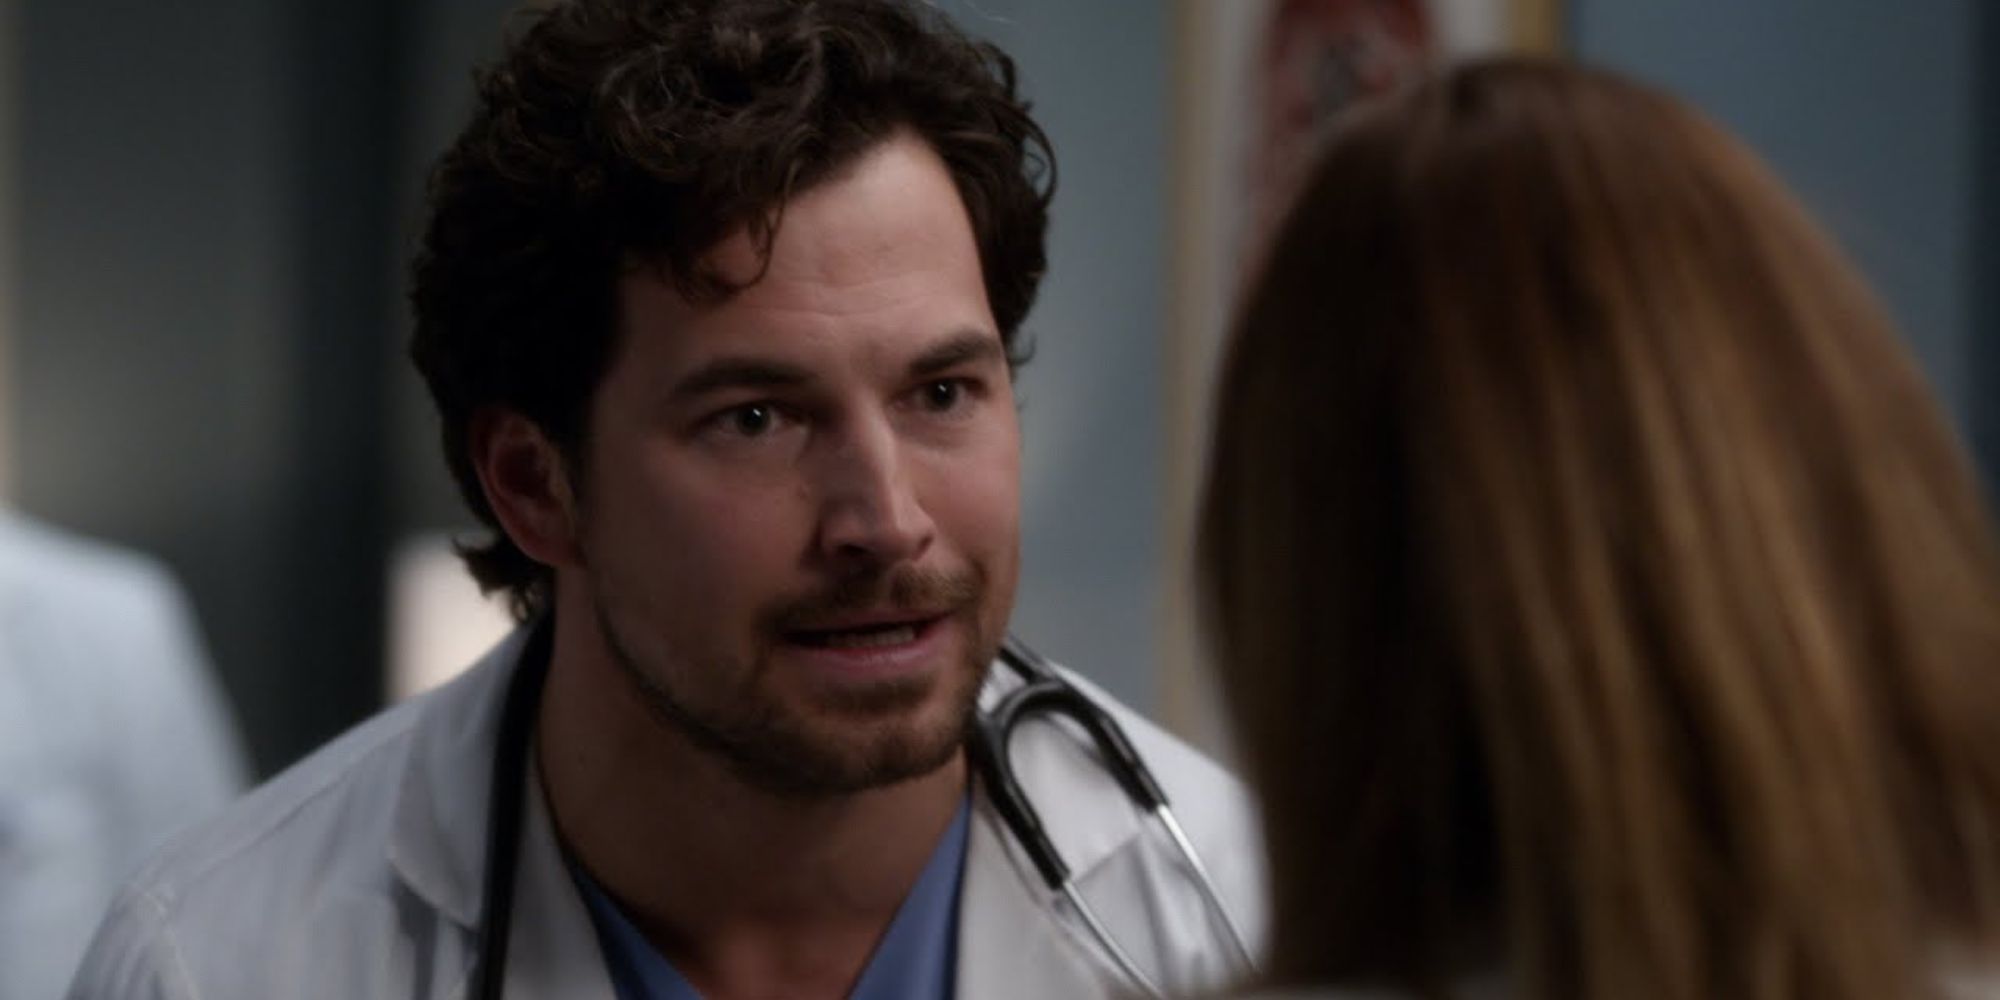 DeLuca argues with Meredith in the hospital corridors